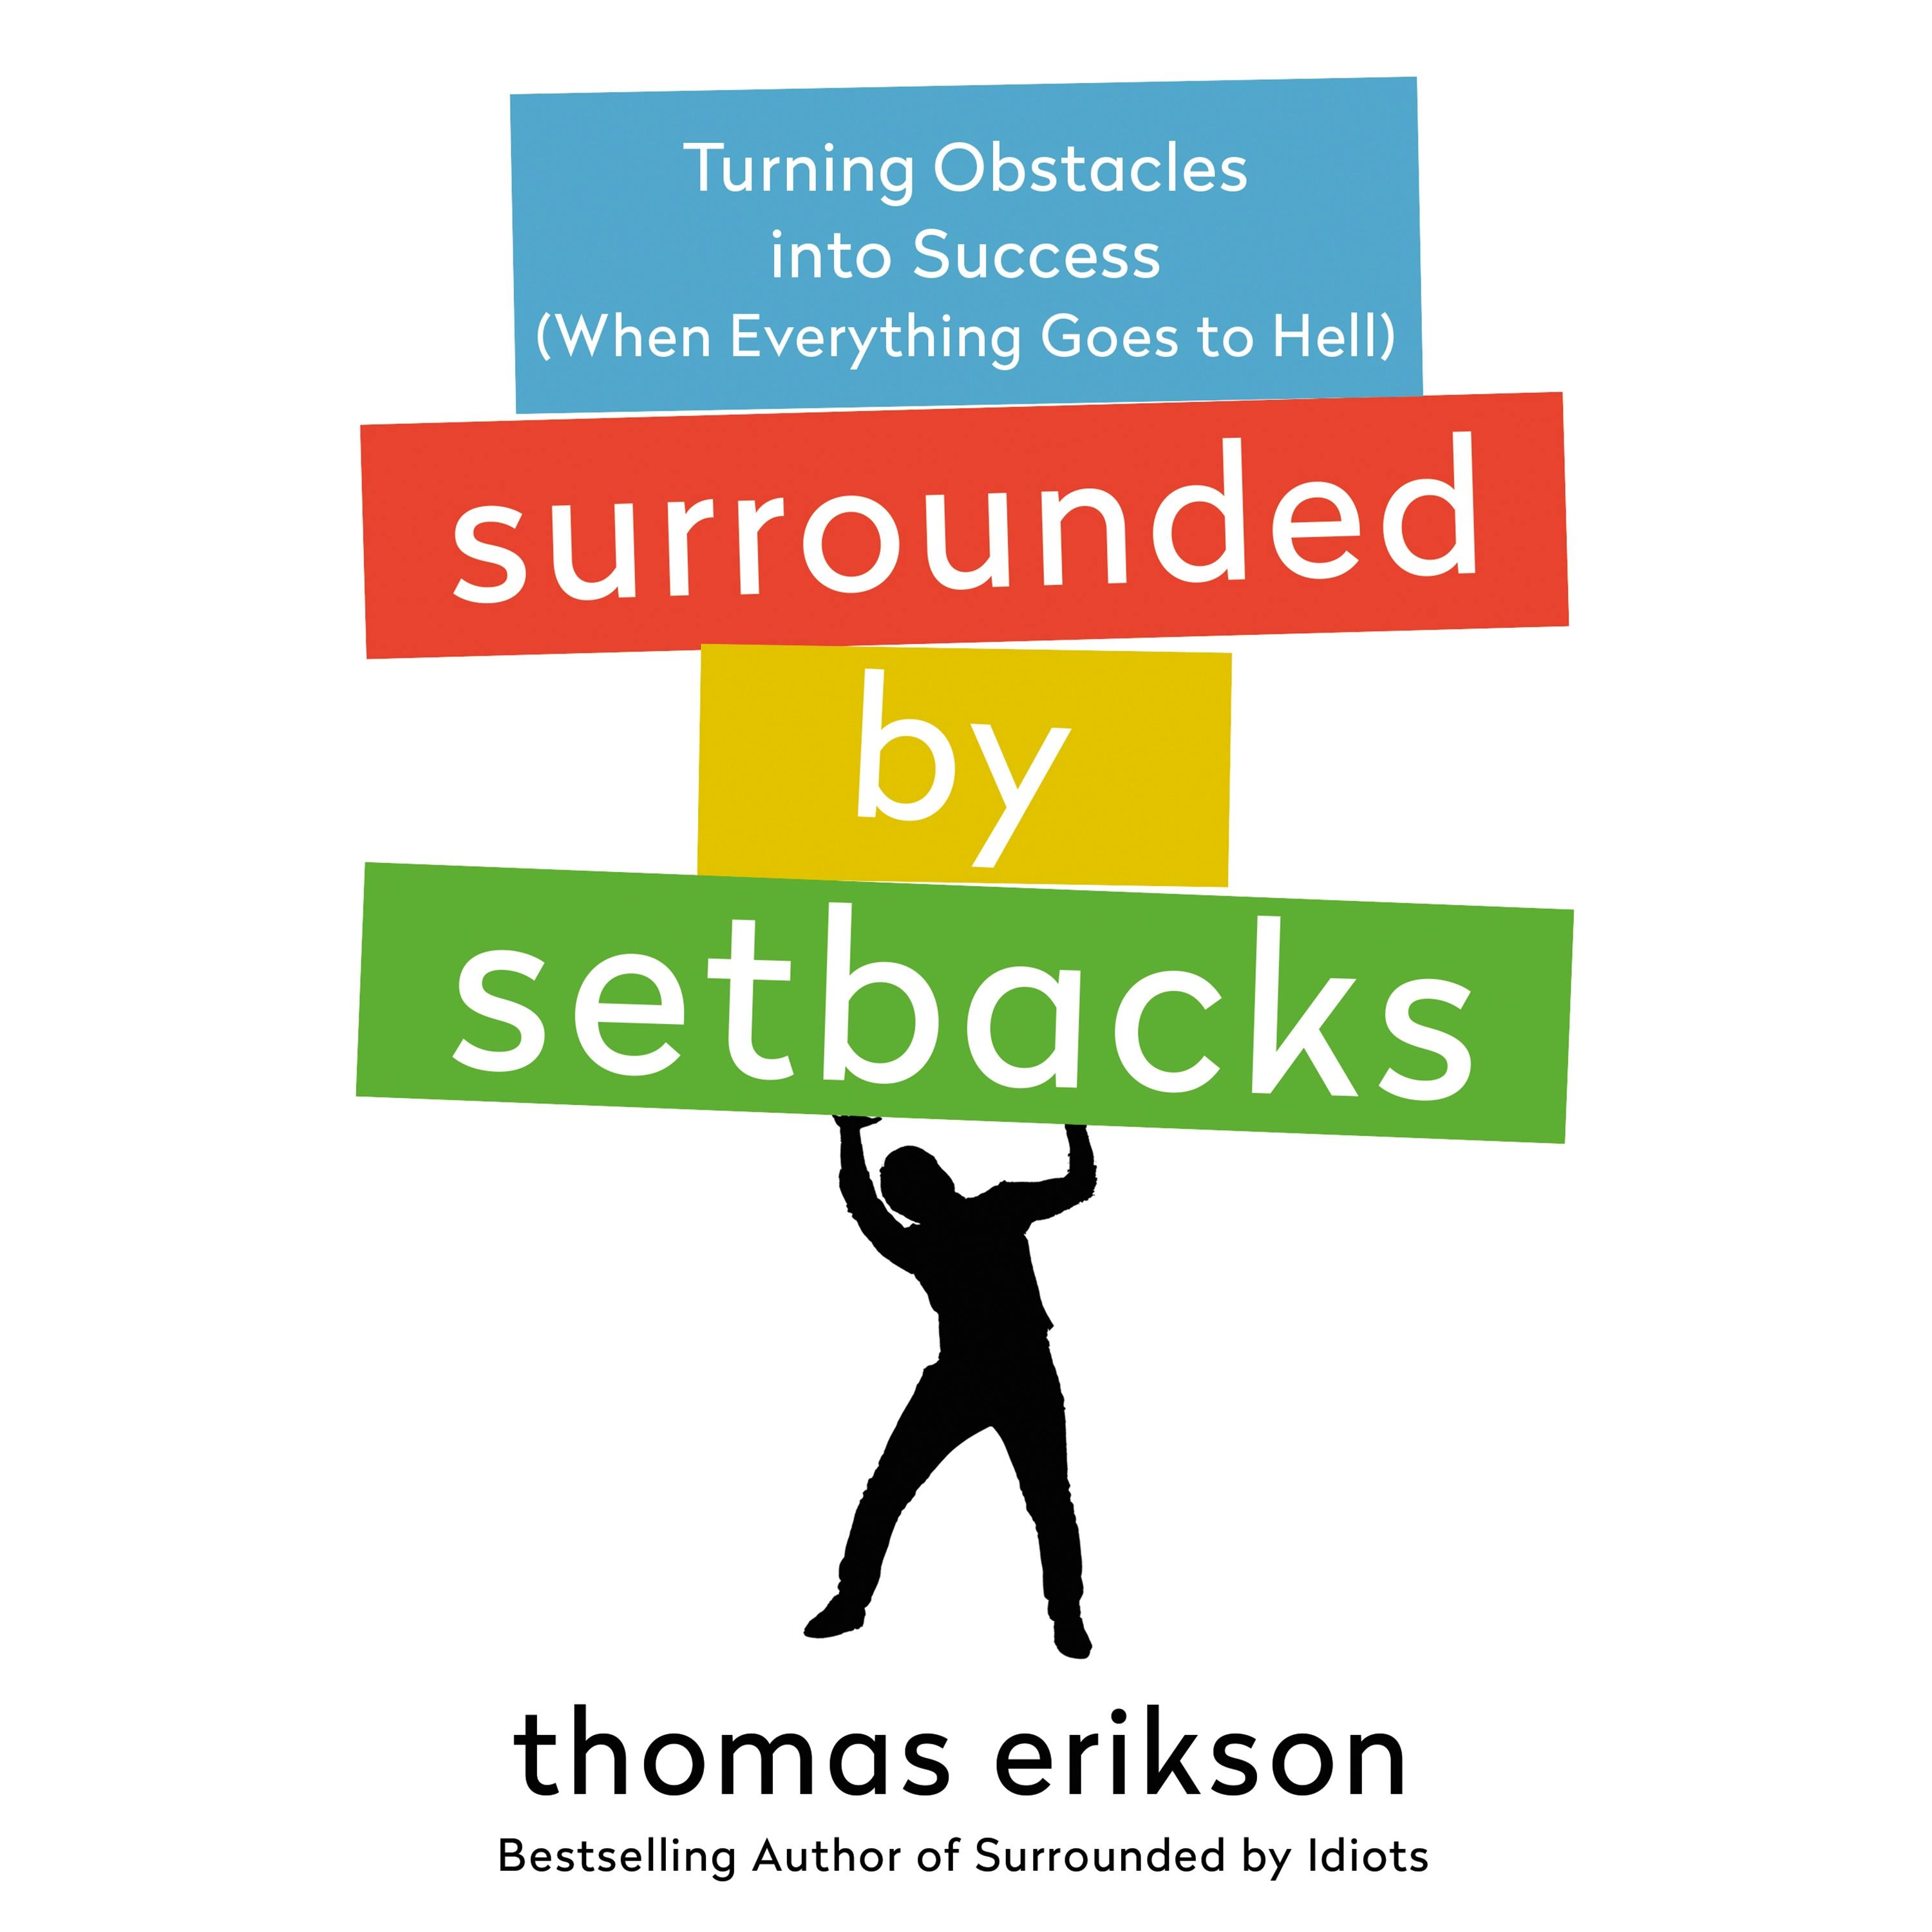 Surrounded by Idiots by Thomas Erikson